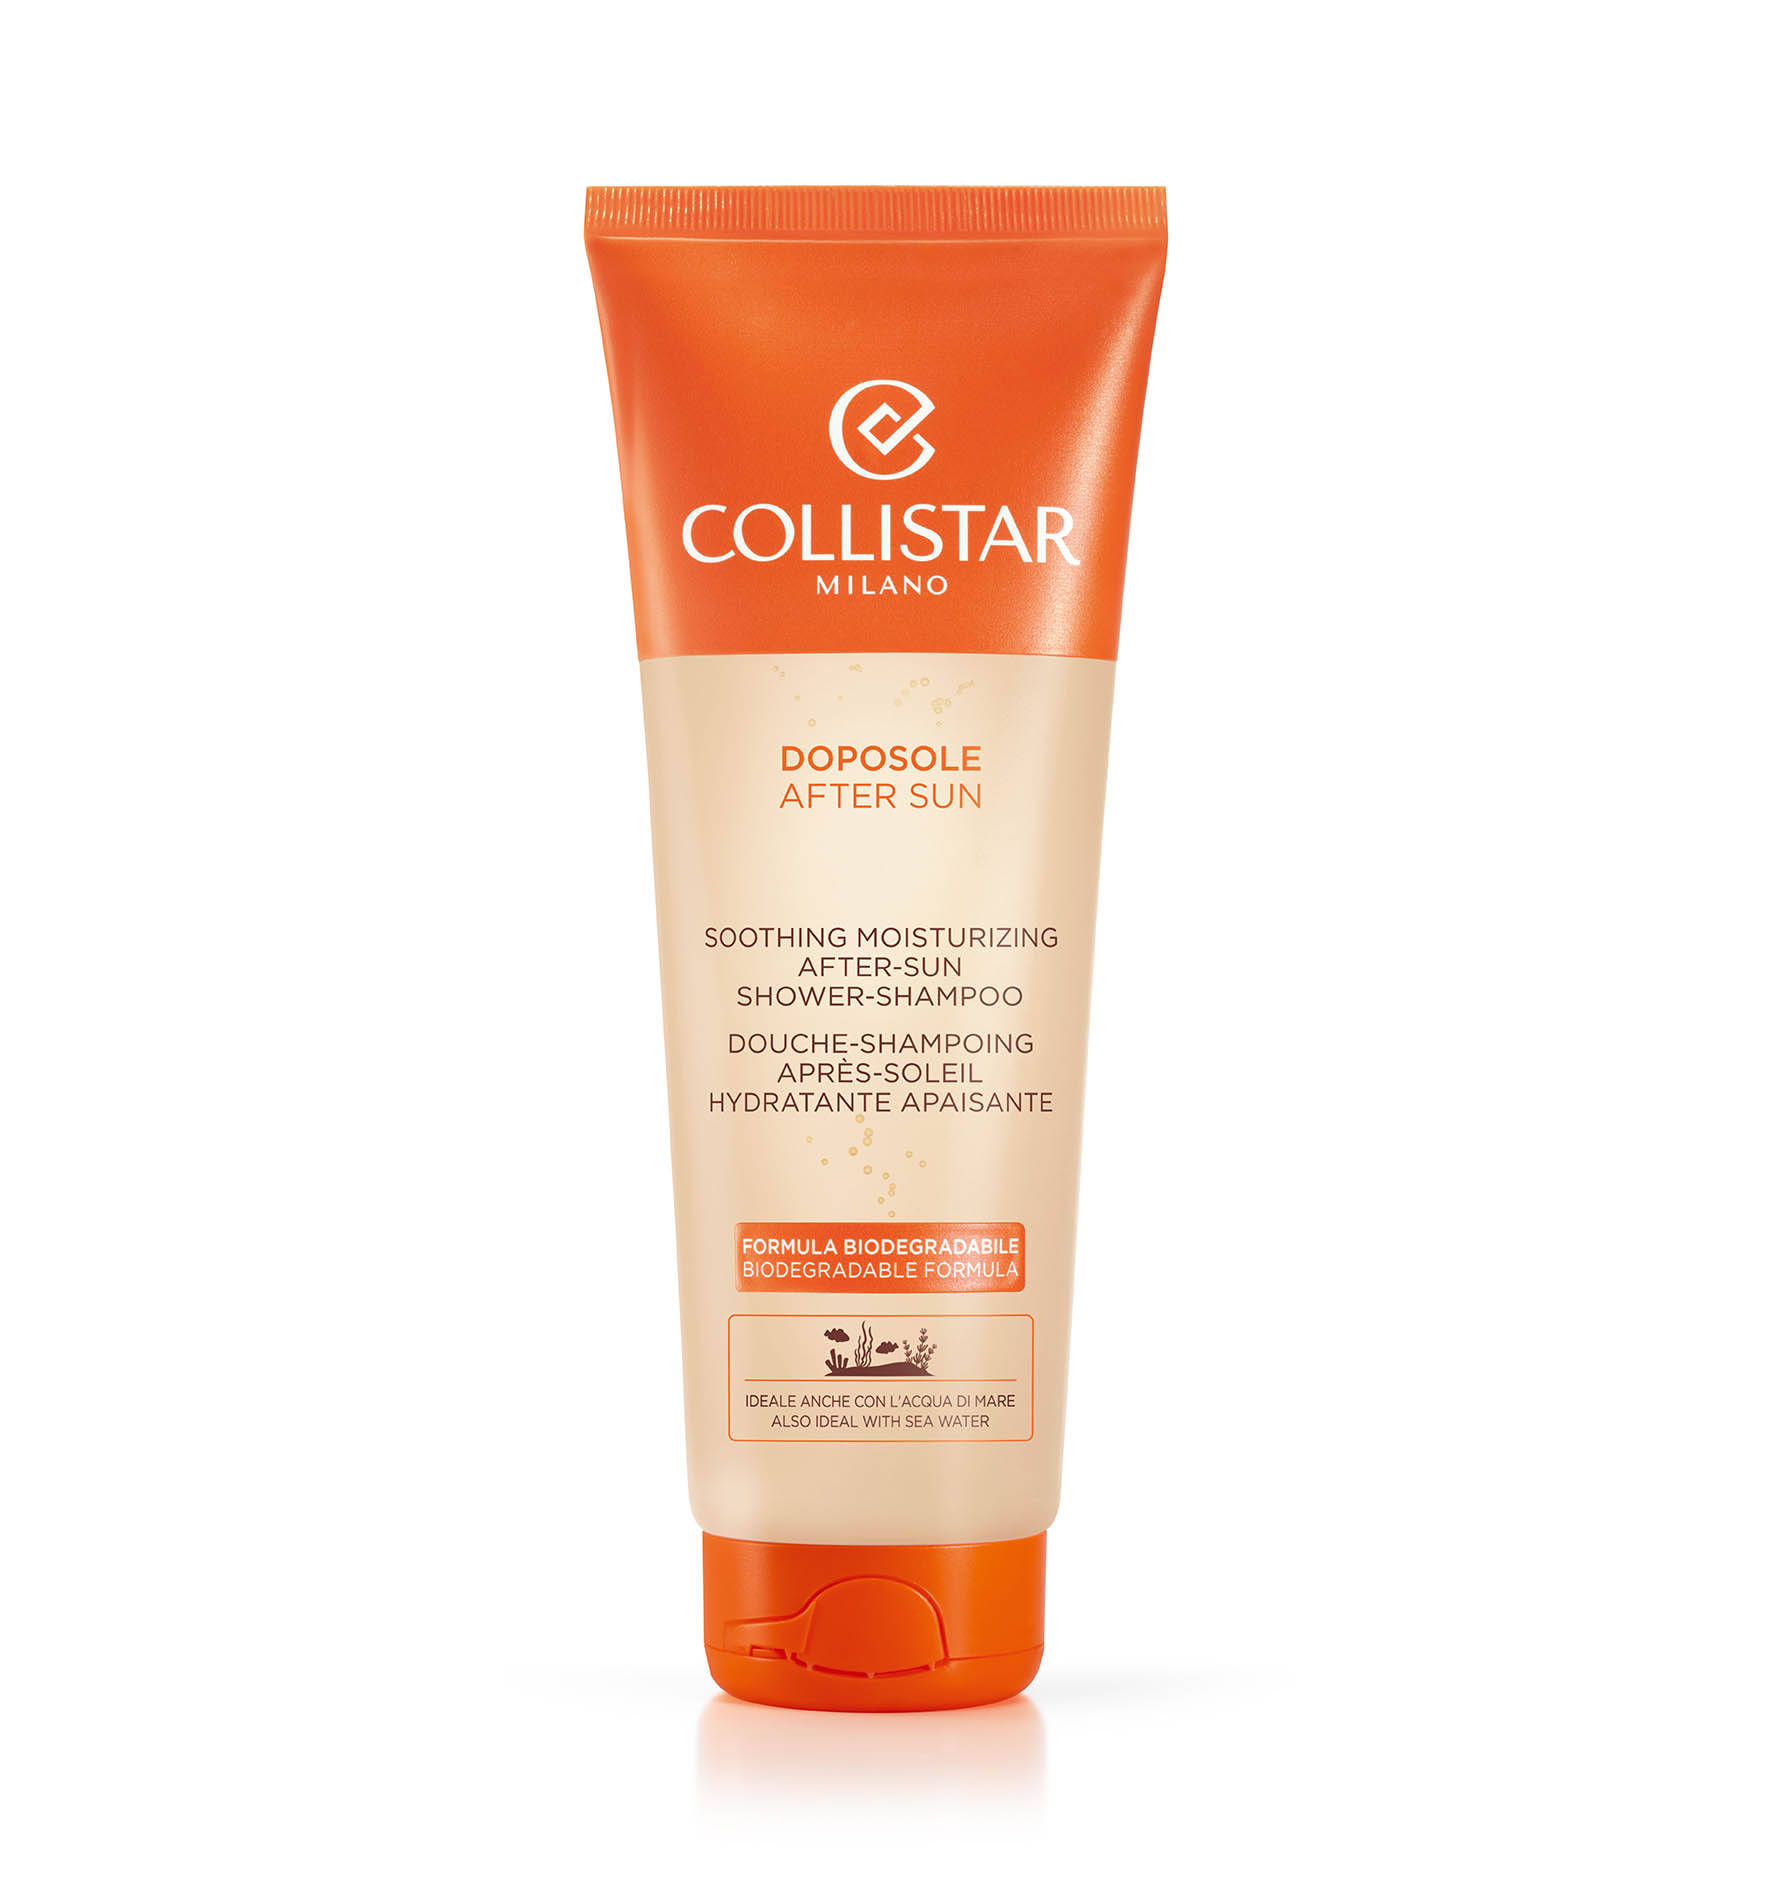 SOOTHING MOISTURIZING AFTER-SUN SHOWER-SHAMPOO - Ecocompatibili | Collistar - Shop Online Ufficiale